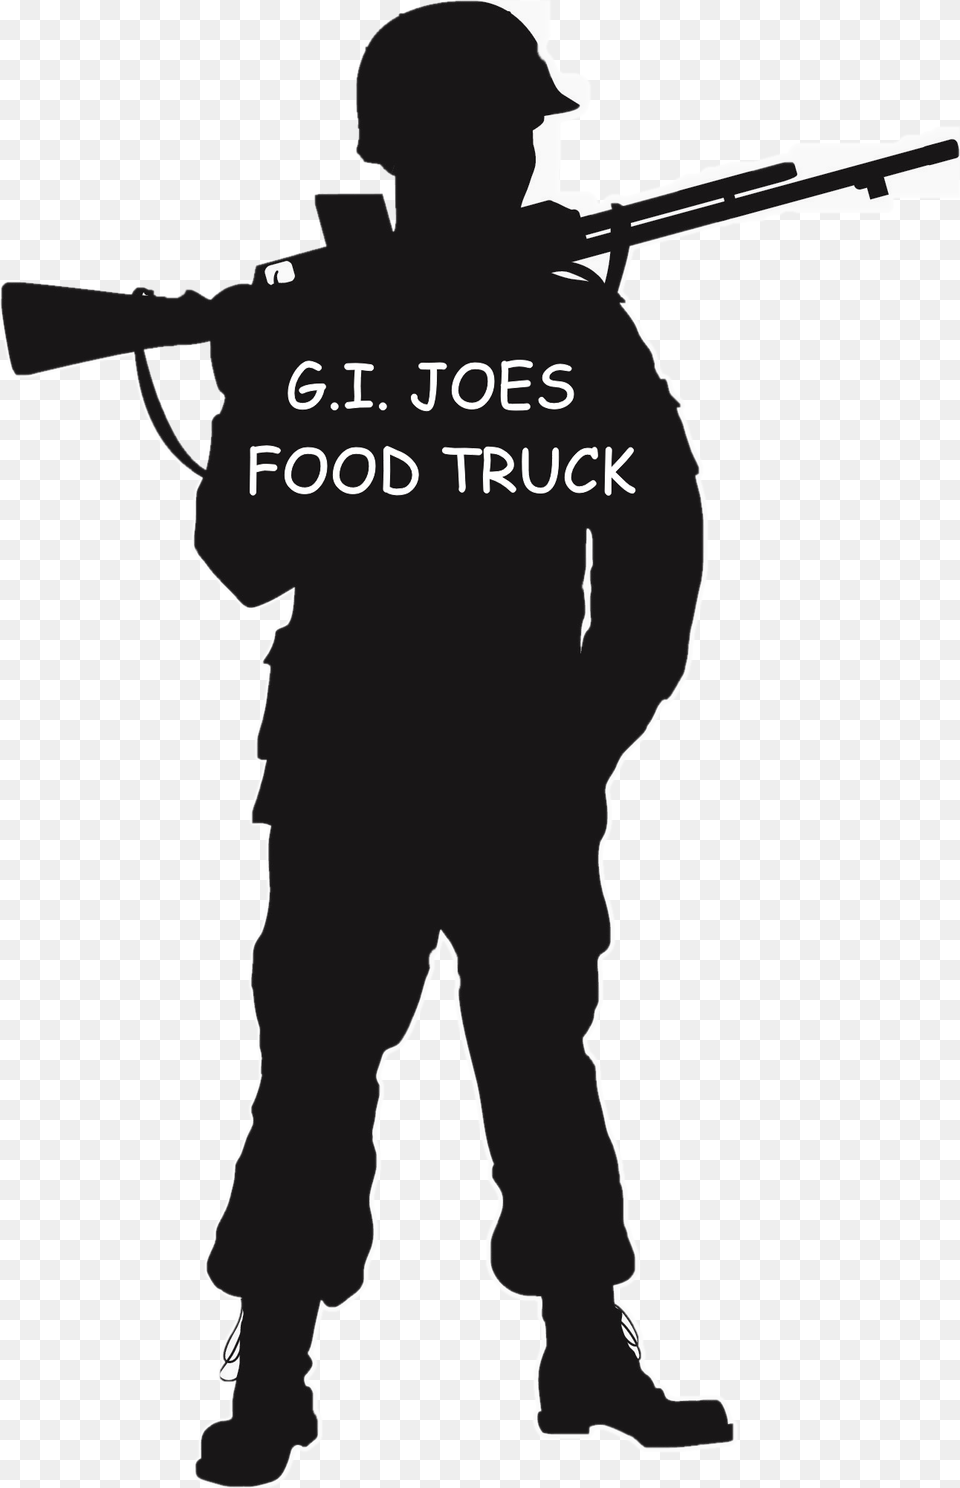 Joes Food Truck Llc World War 2 Soldier Silhouette, Adult, Person, Man, Male Png Image